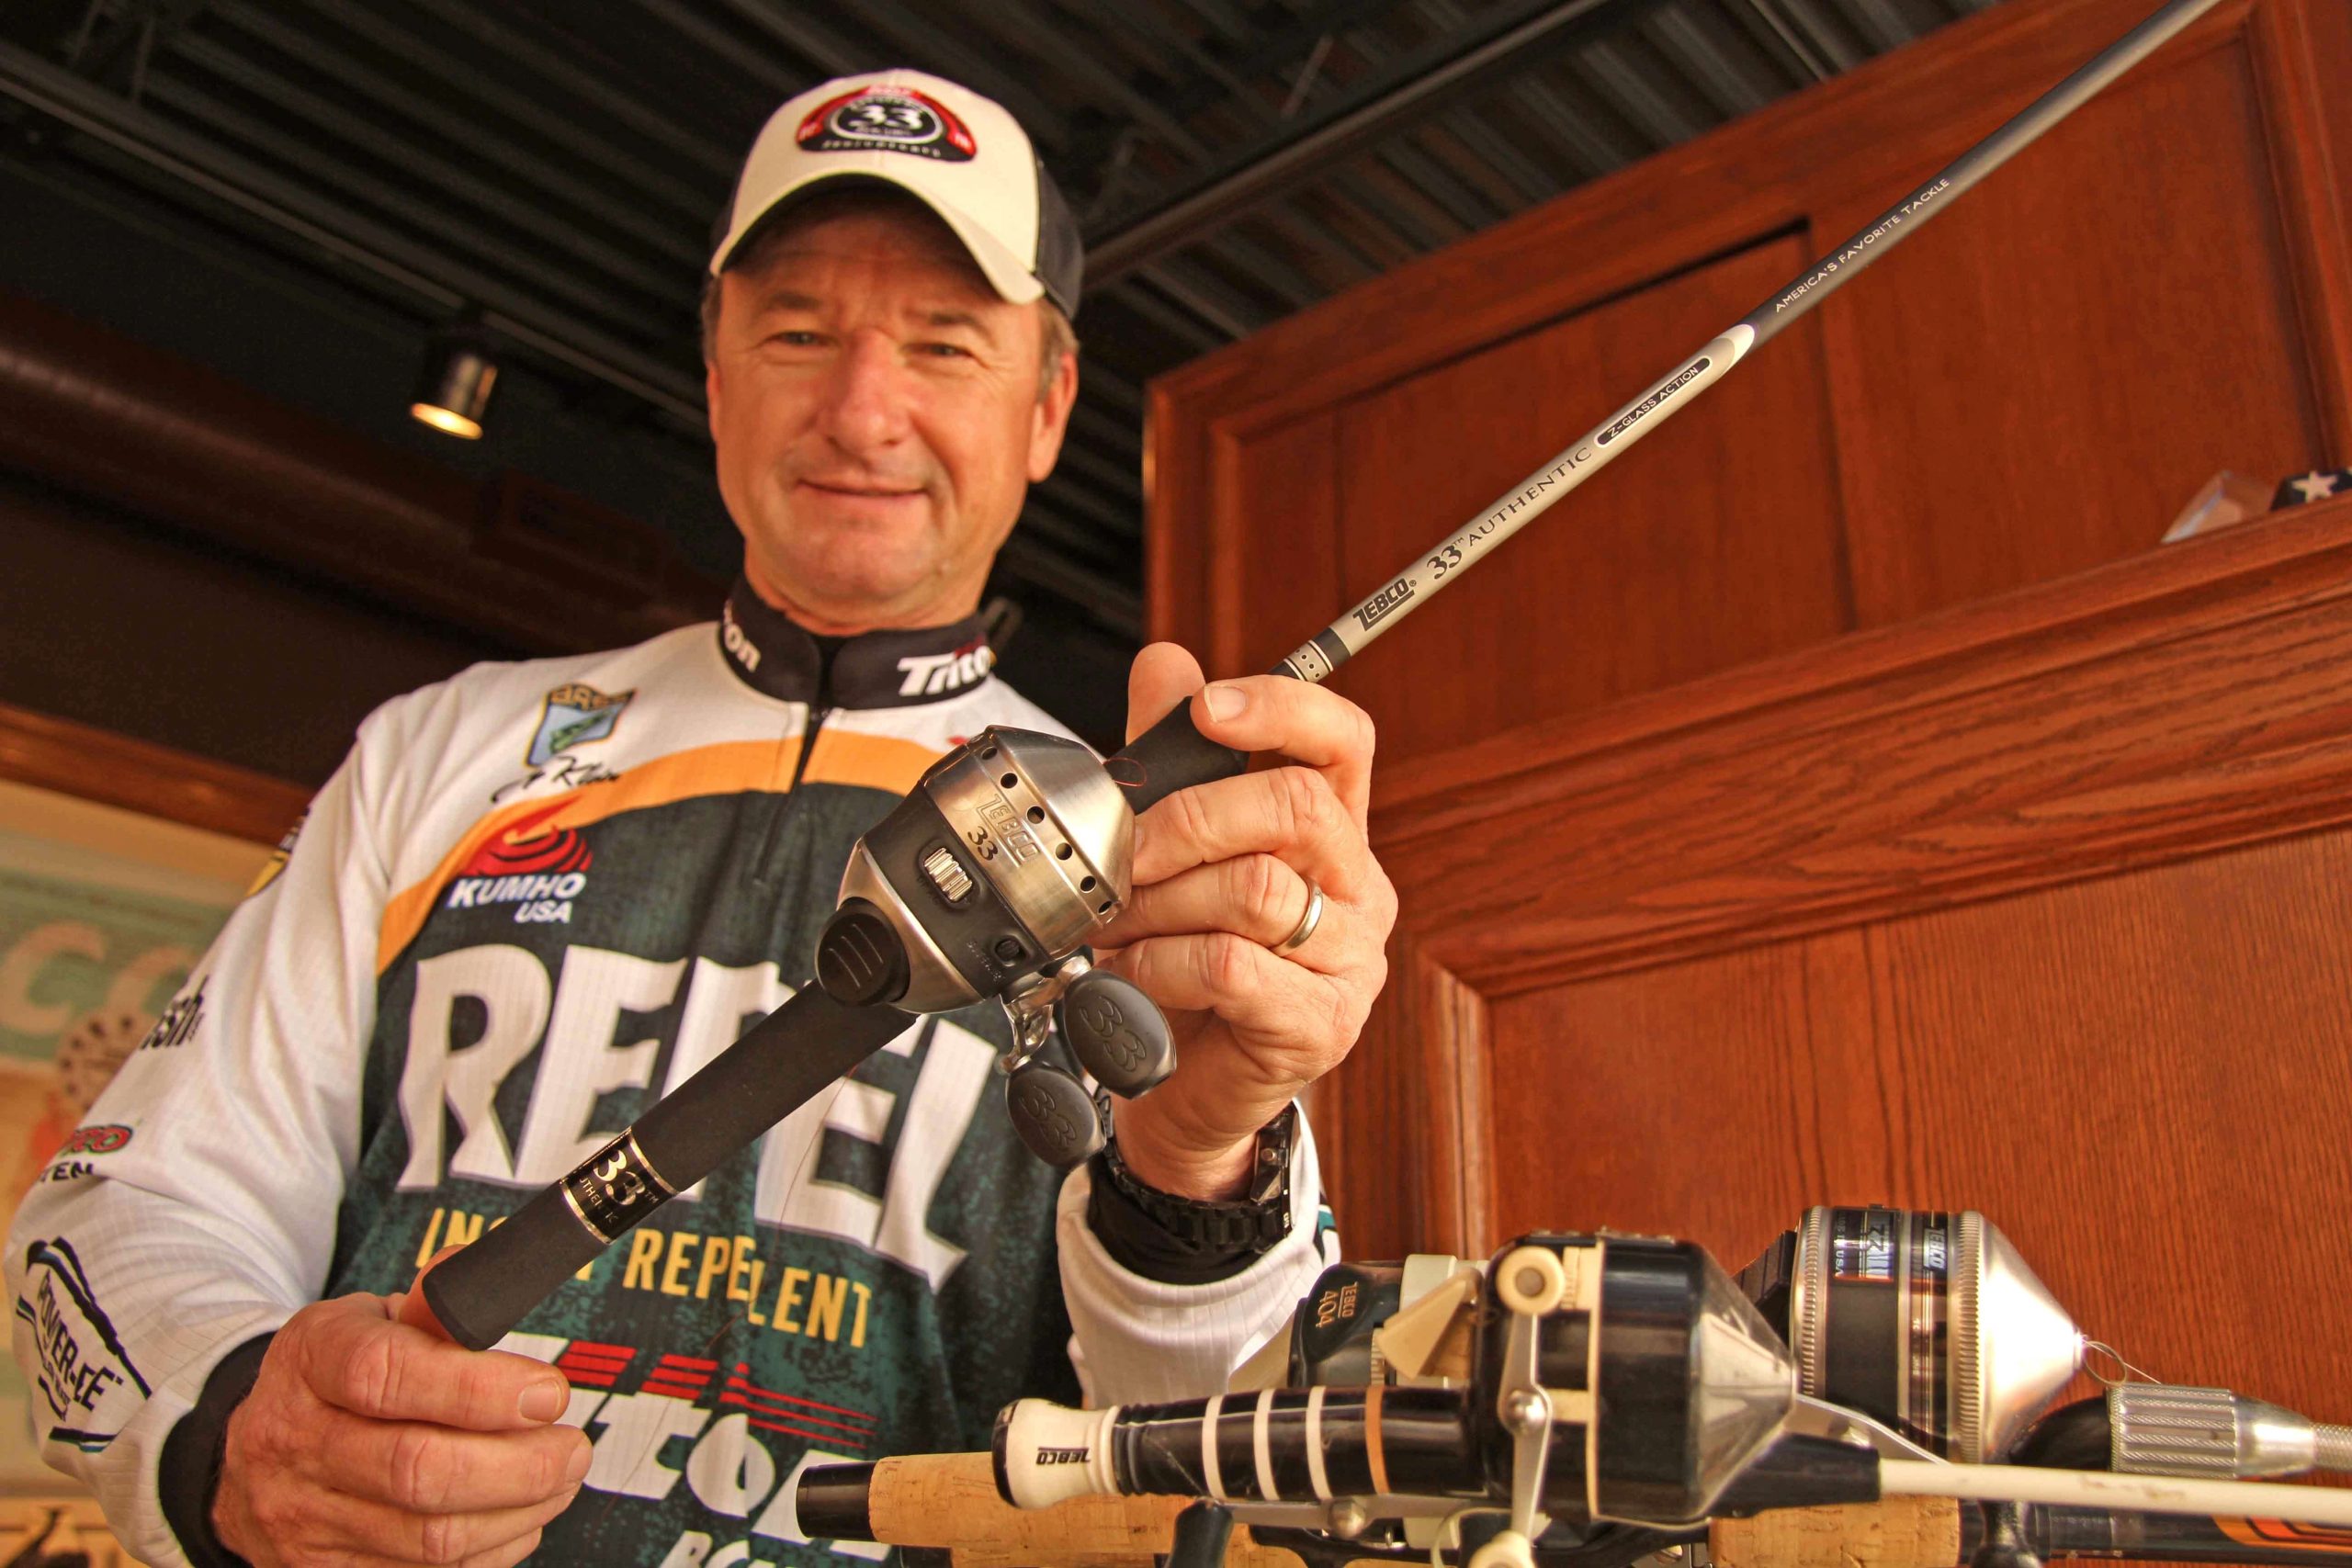 Klein will carry a Zebco 33 in Classic competition - Bassmaster